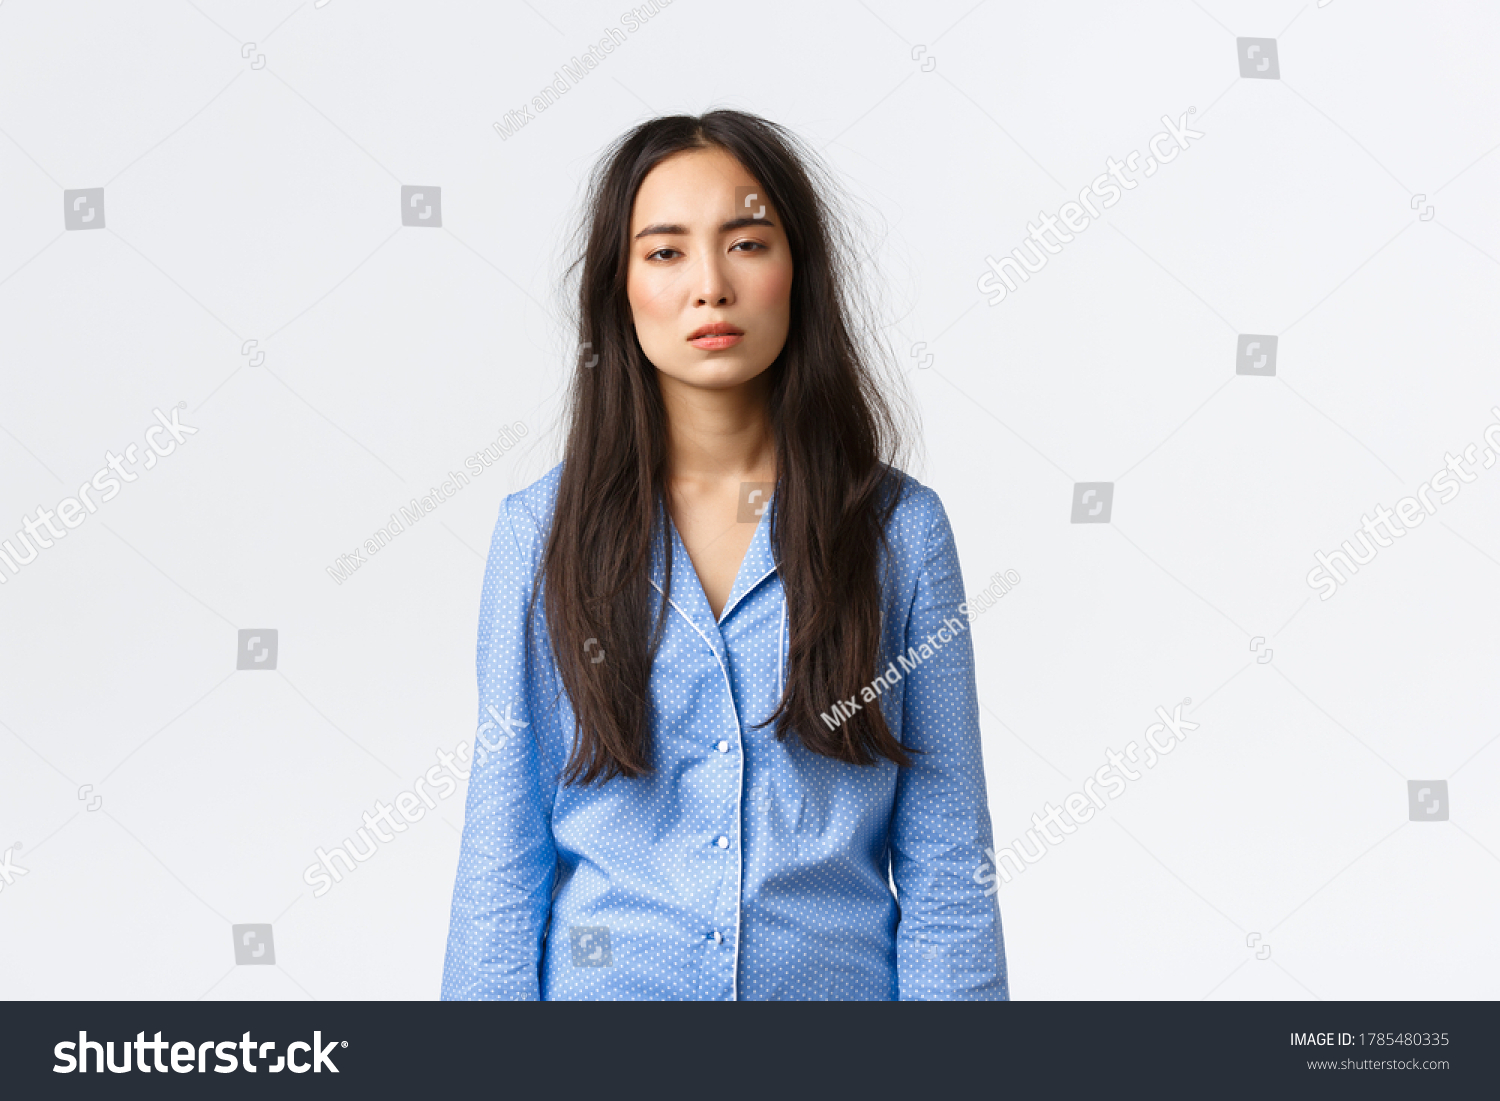 Exhausted asian woman with messy hair after lying in bed, wearing pajamas, looking tired with sleepy eyes as suffering insomnia, didnt have much sleep, waking up early, standing white background #1785480335